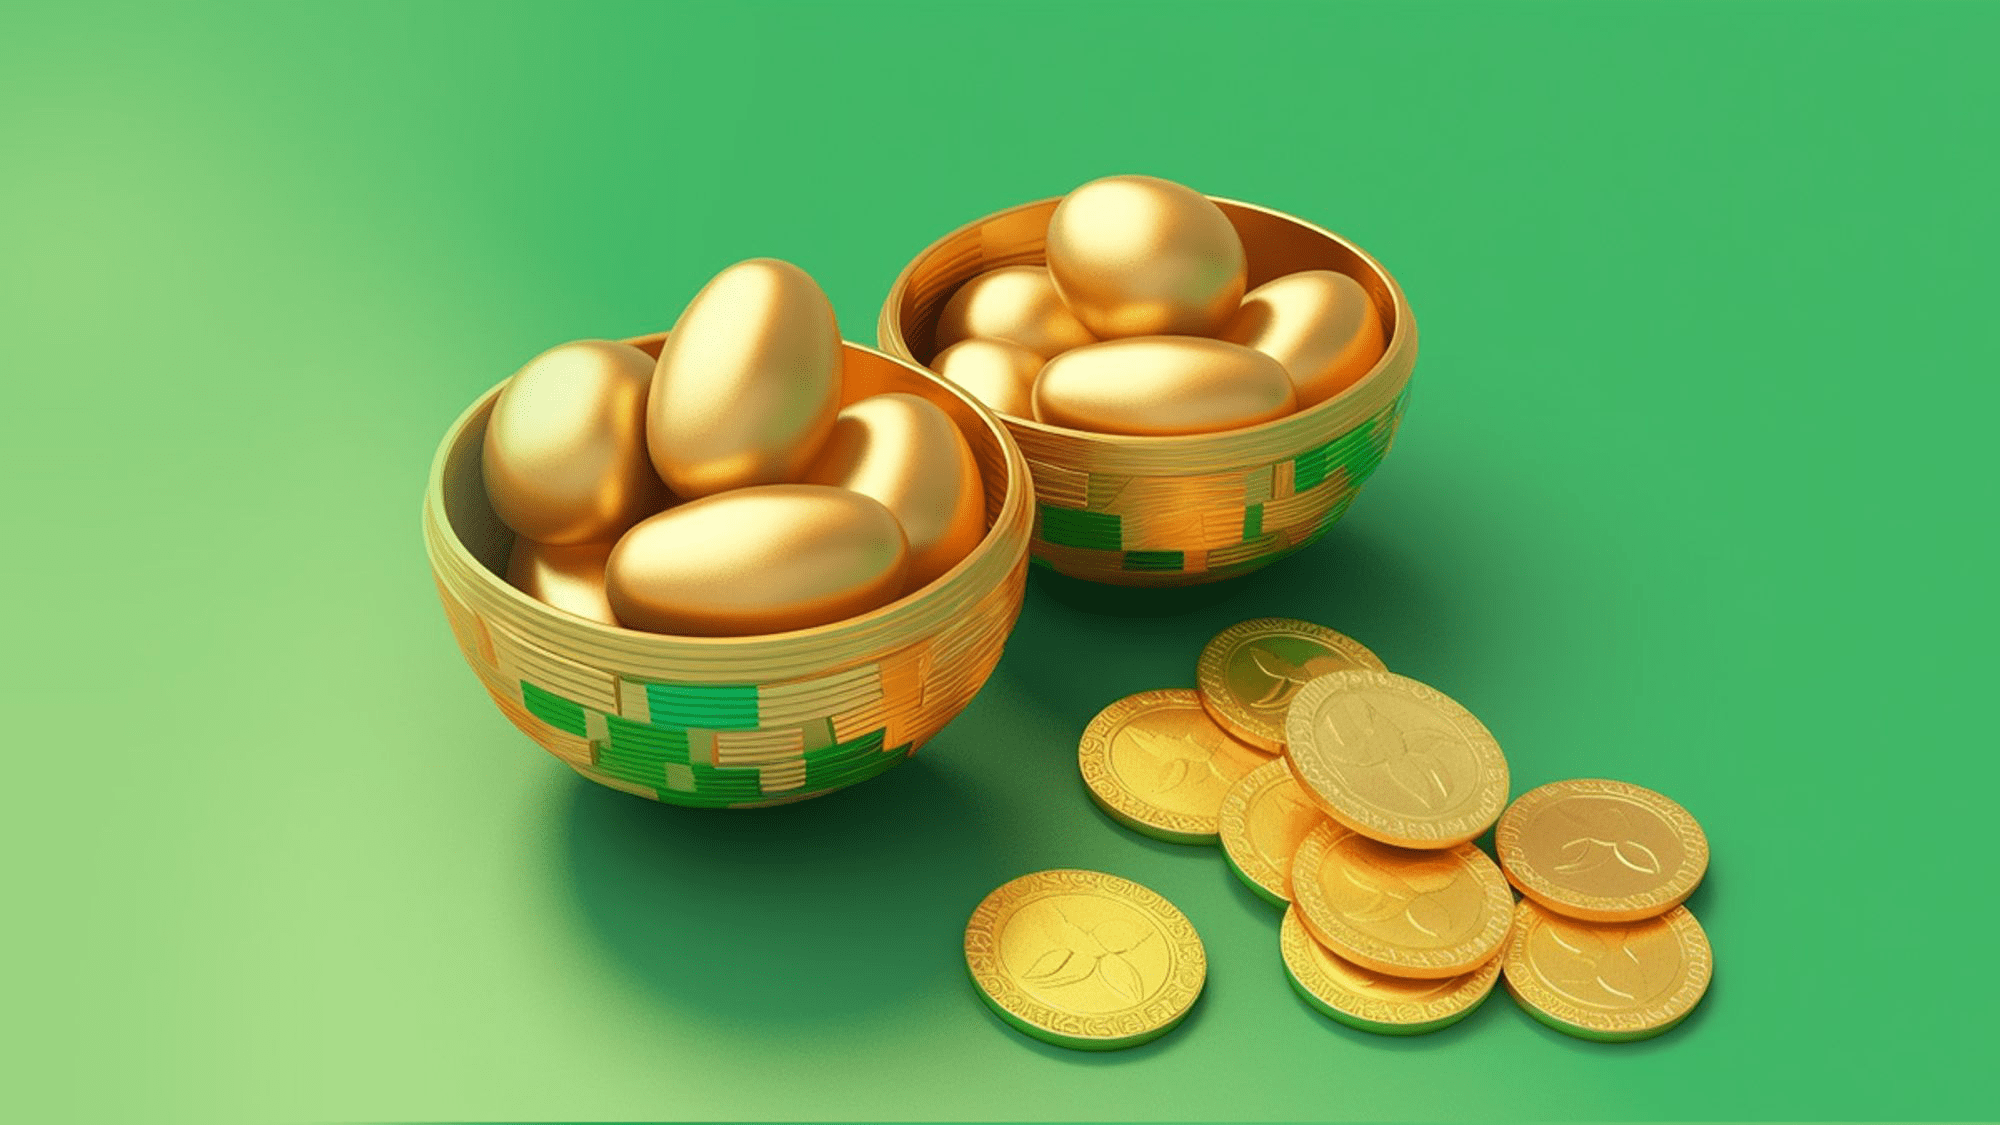 ddl_3_basket_with_gold_eggs_and_coins_at_the_center_more_eggs_a_b8dff136-f867-48fe-abc5-aa41698ba06b (1).png